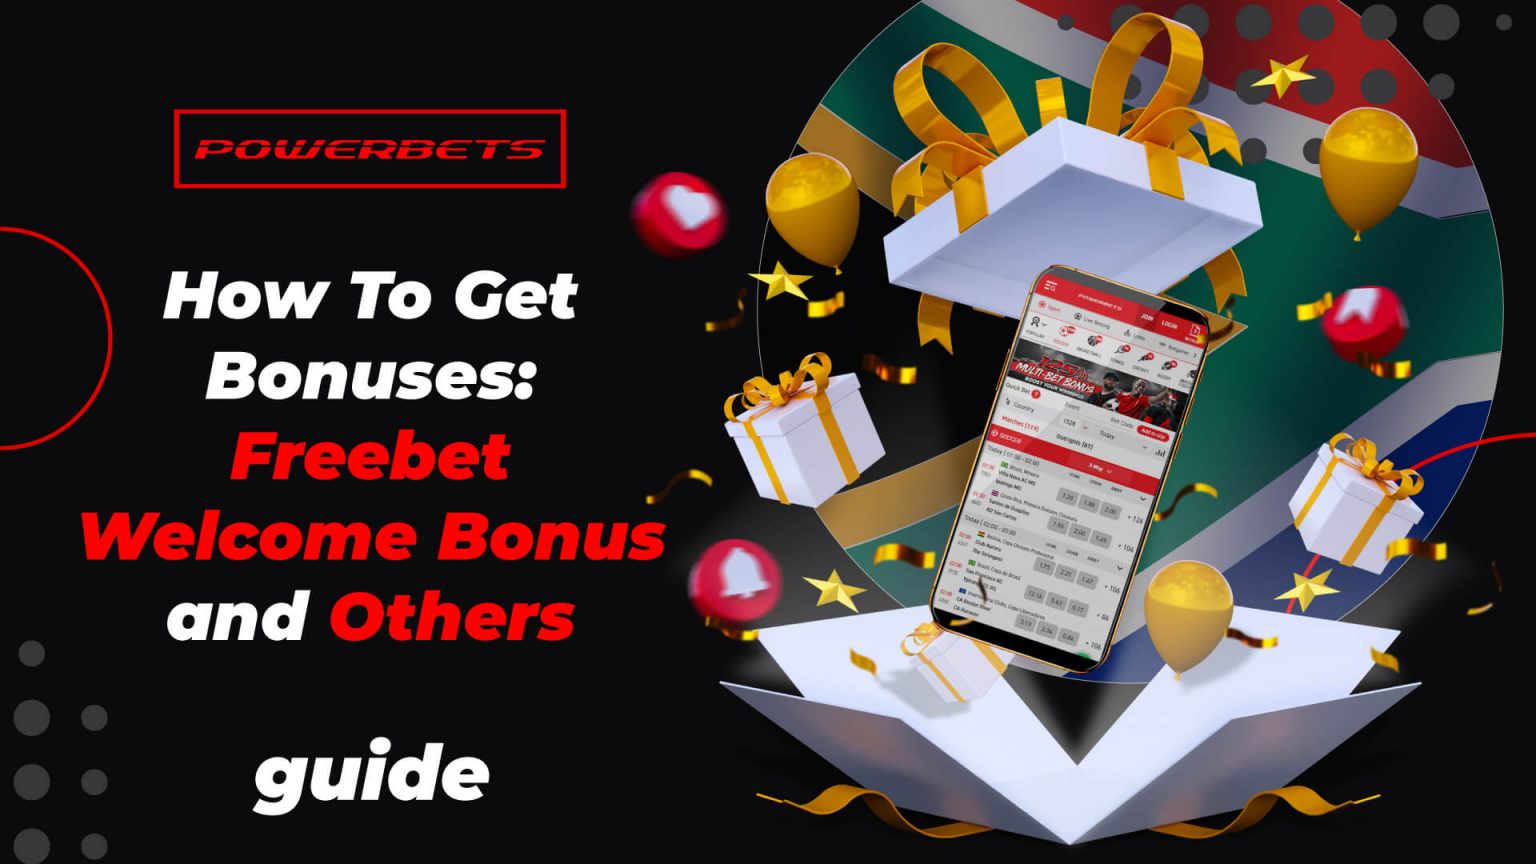 Online Casinos for Beginners: Expert Tips and Advice to Get Started Without Driving Yourself Crazy